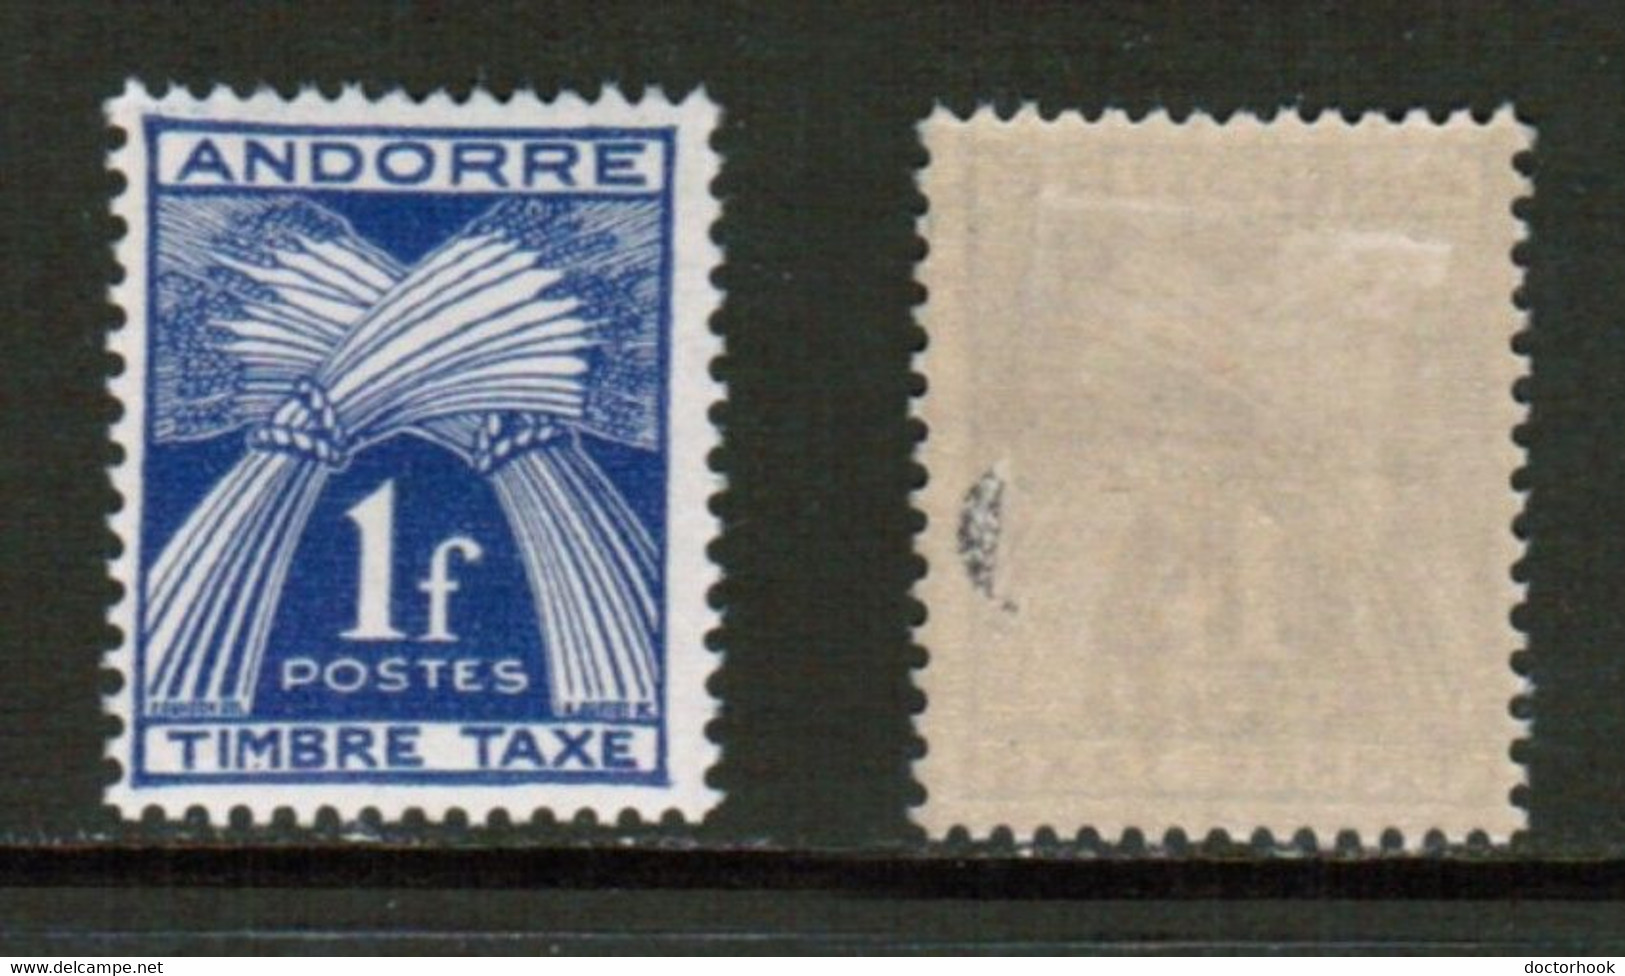 FRENCH ANDORRA   Scott # J 33* MINT LH (CONDITION AS PER SCAN) (WW-2-49) - Unused Stamps